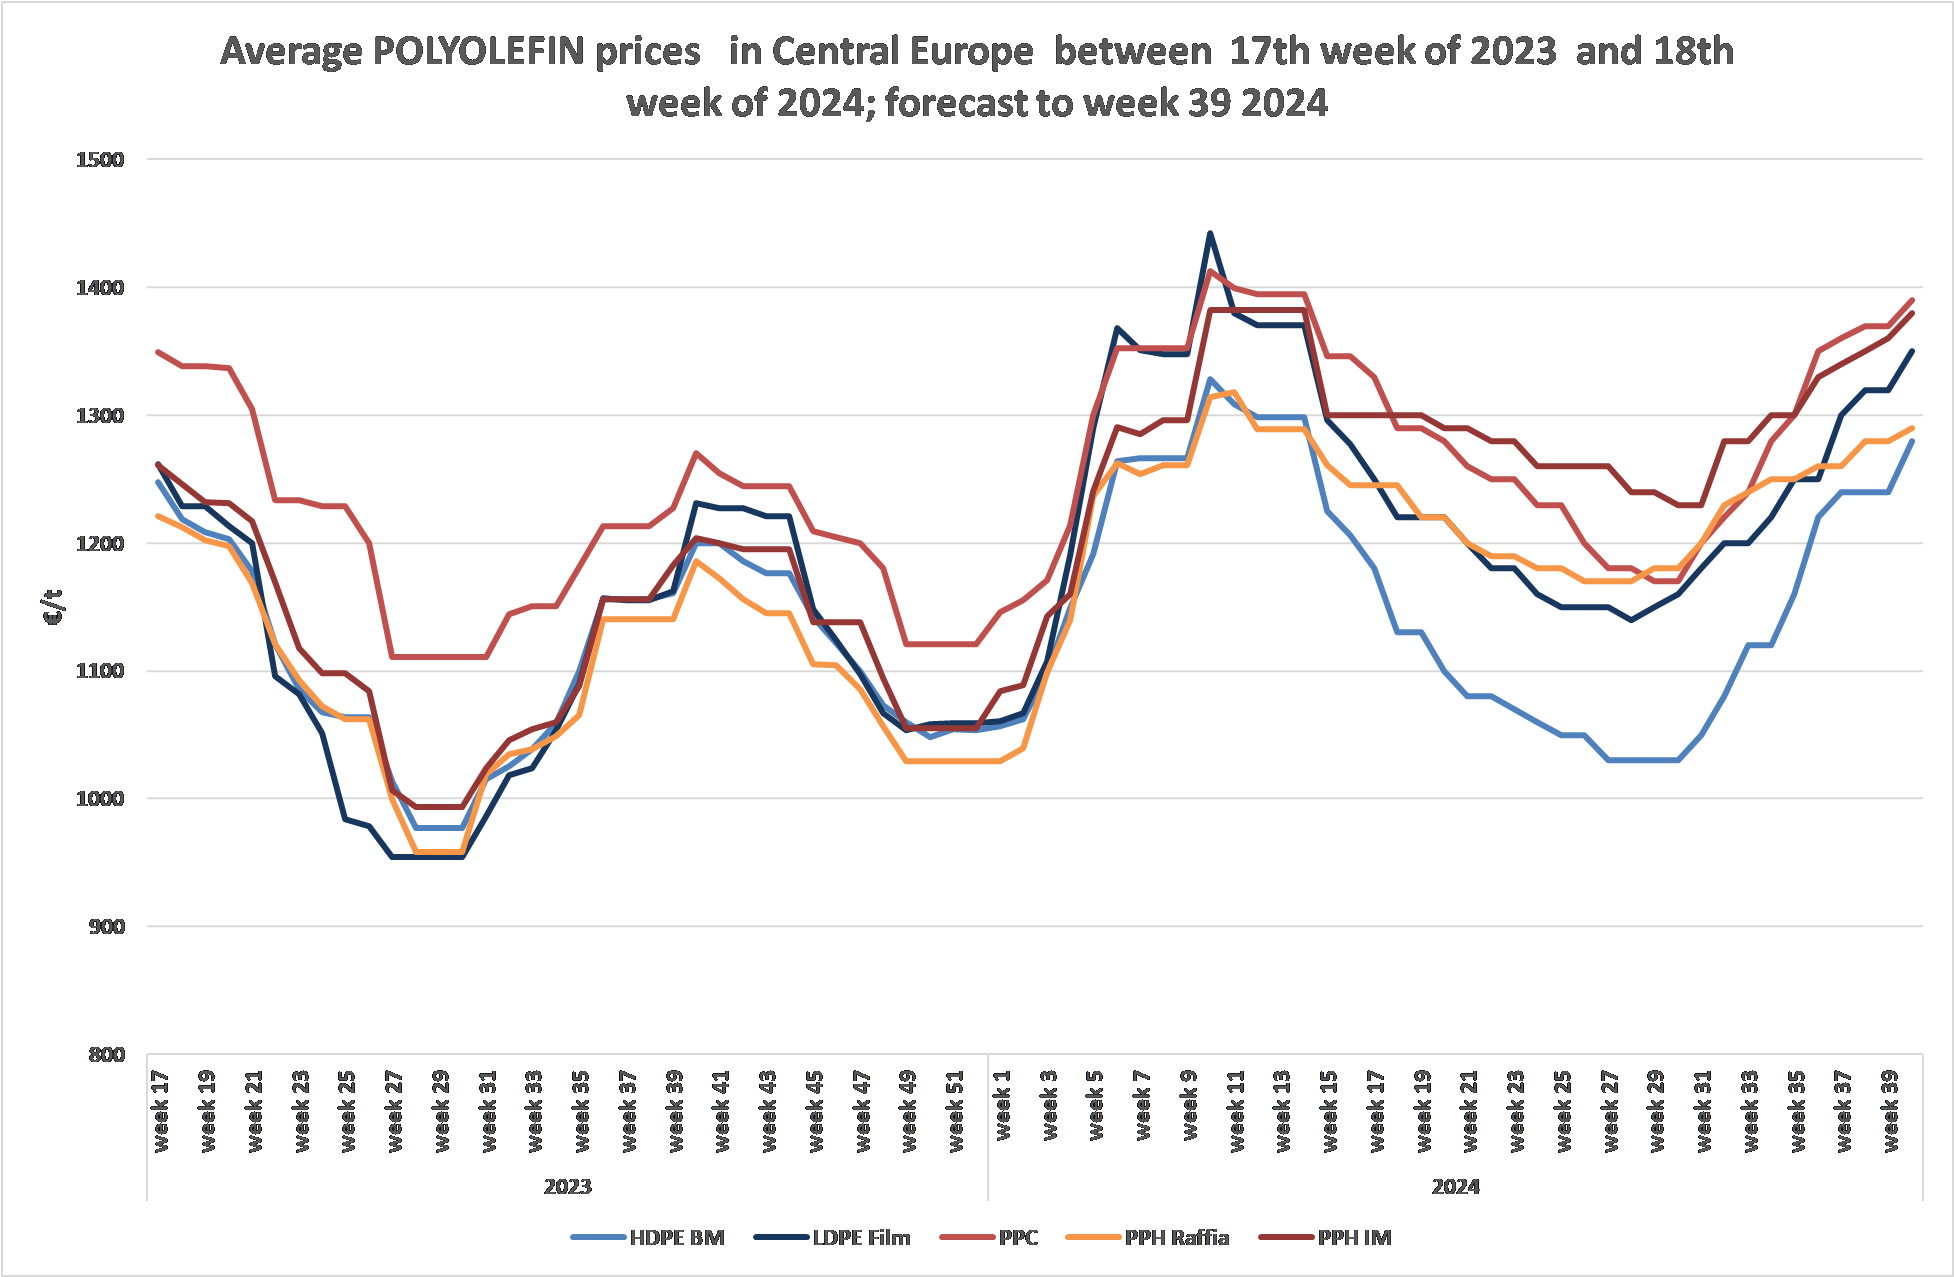 Average POLYOLEFIN prices in Central Europe from week 17th 2023 to week 18 2024. Forecast to week 39 2024